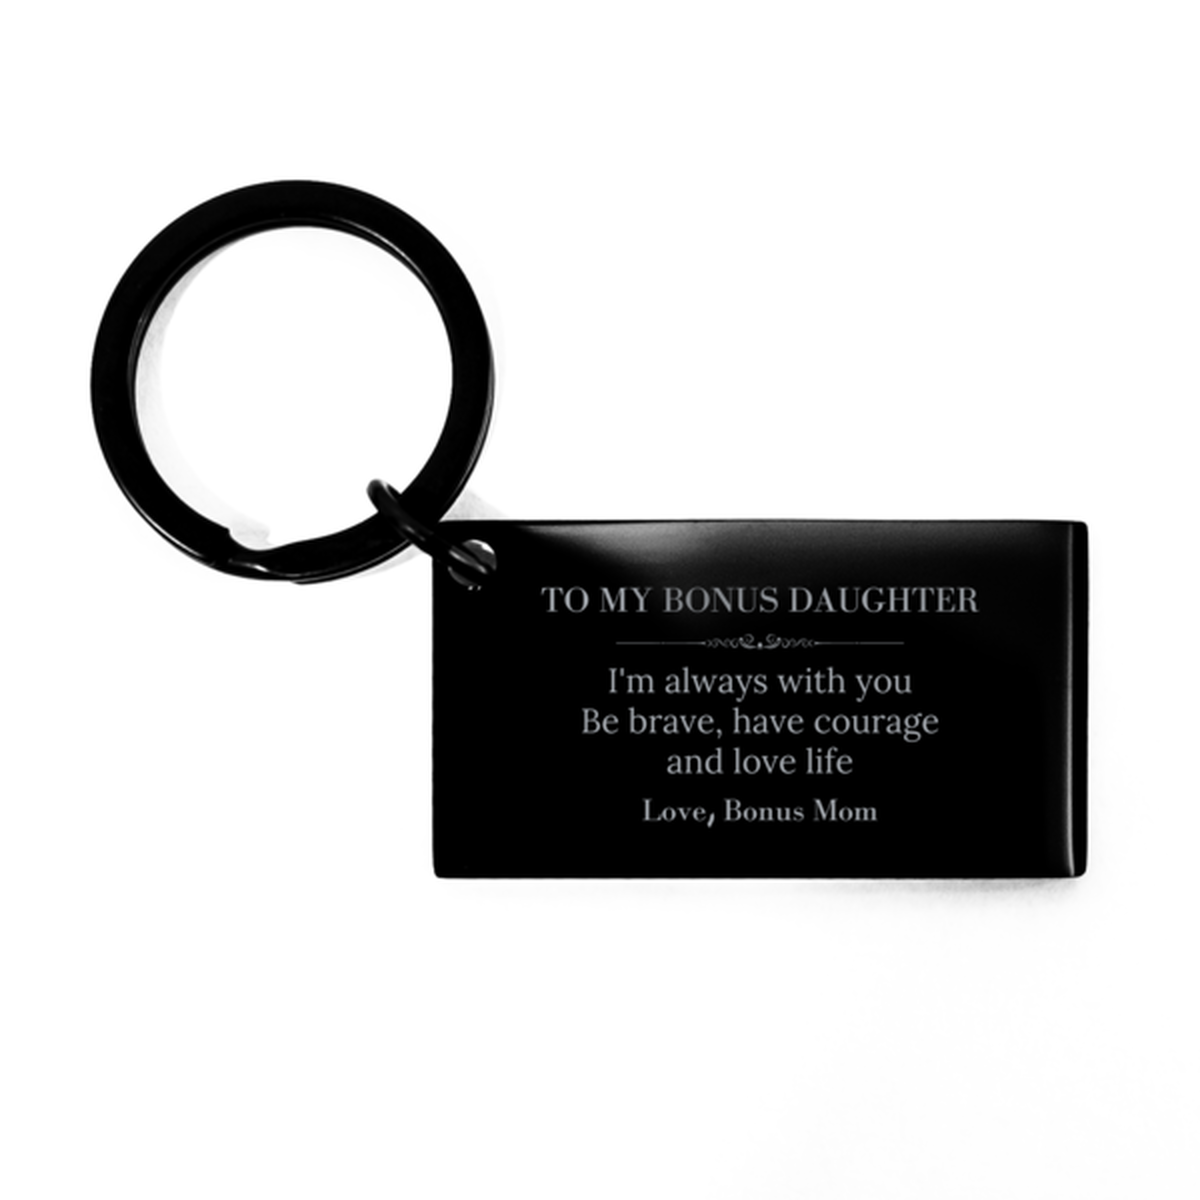 To My Bonus Daughter Gifts from Bonus Mom, Unique Keychain Inspirational Christmas Birthday Graduation Gifts for Bonus Daughter I'm always with you. Be brave, have courage and love life. Love, Bonus Mom